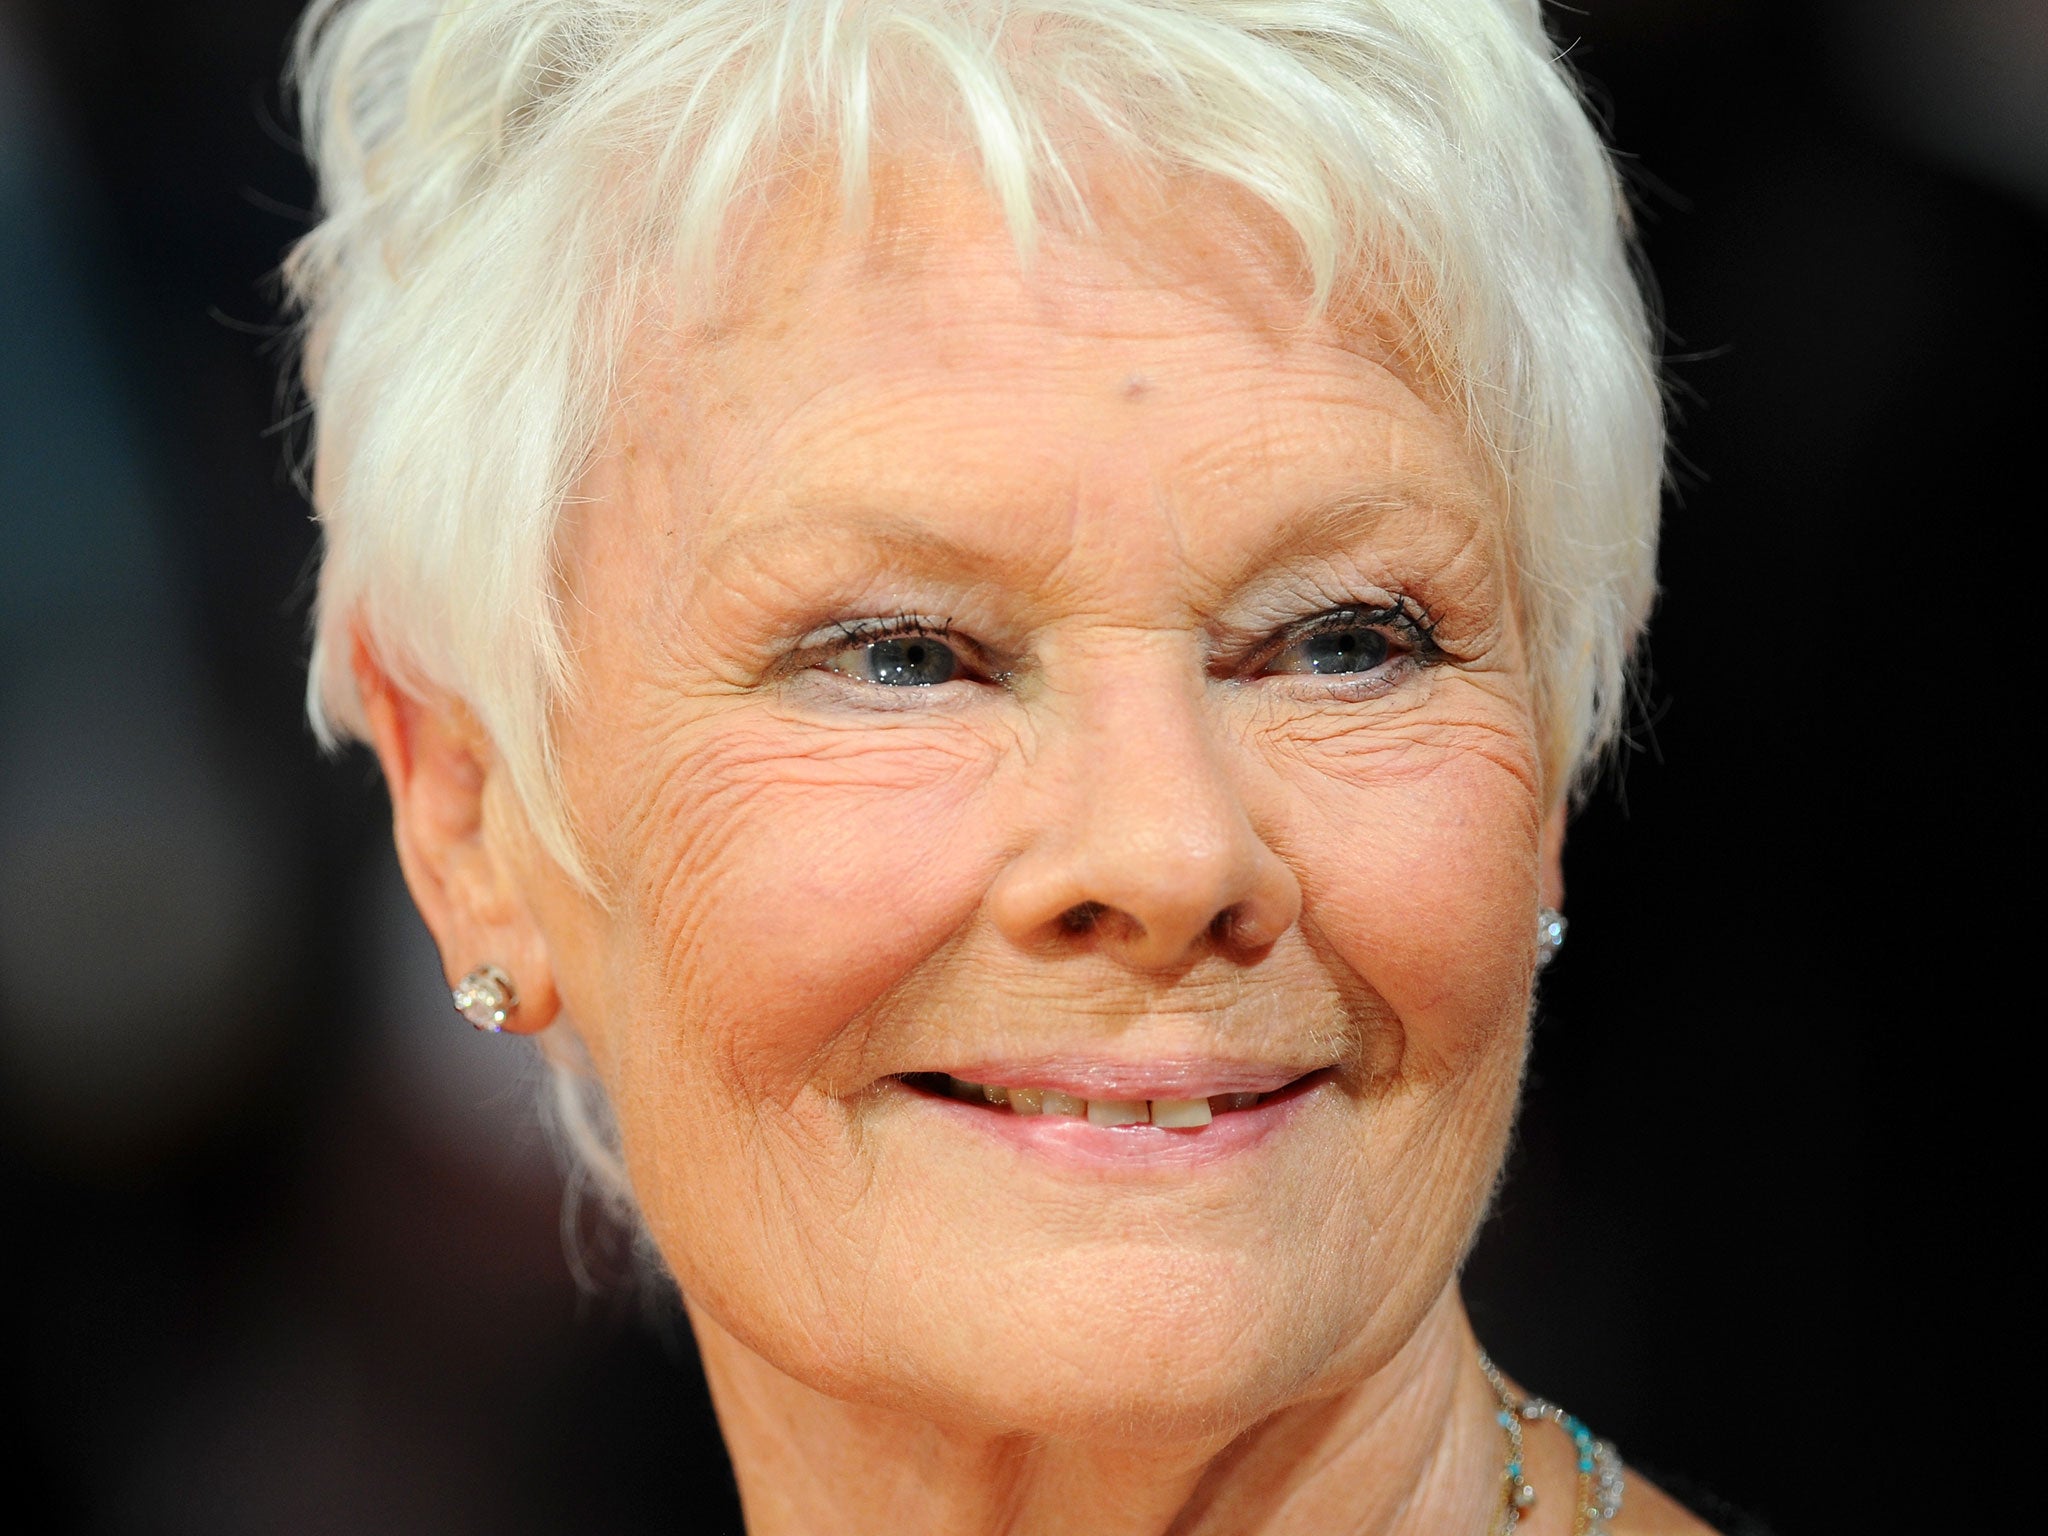 What Do You Ink Dame Judi Dench Plans Tattoo To Mark Her 80th Birthday